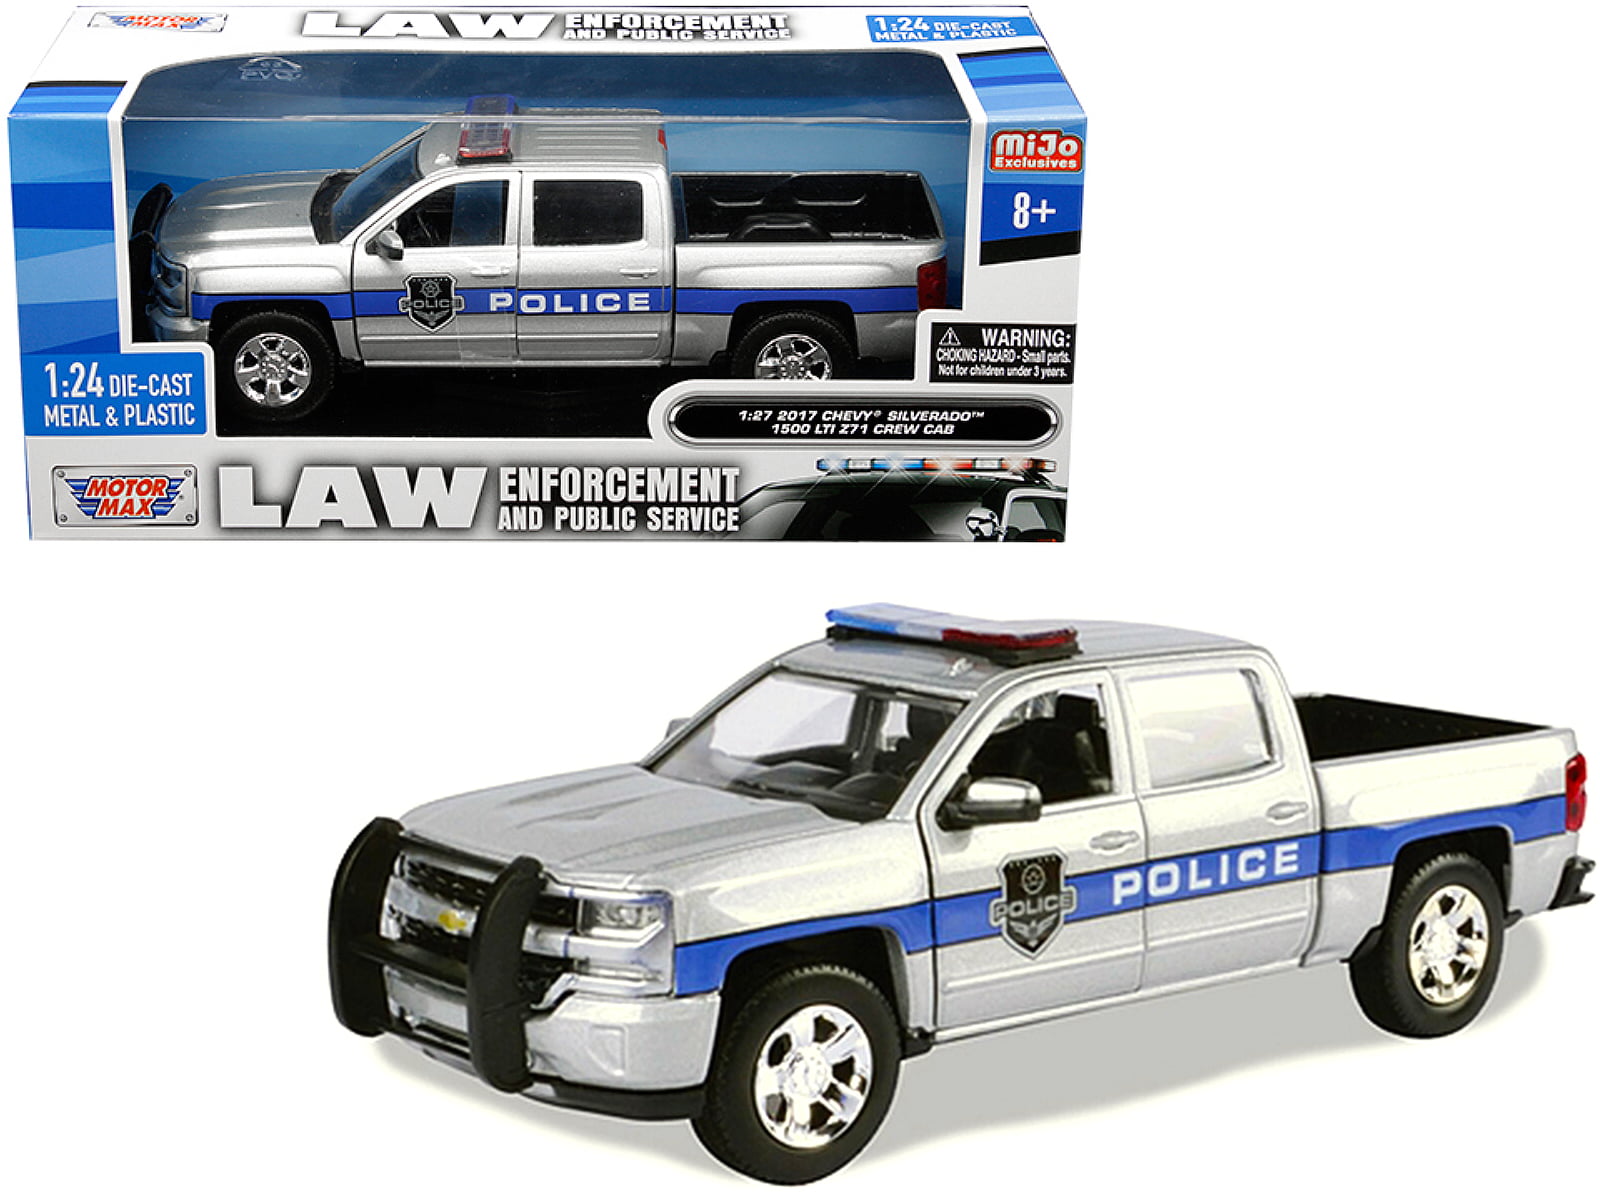 2011 Dodge Charger Enforcer Police Promo Diecast Car 1:43 Motormax 5 inch B/W 